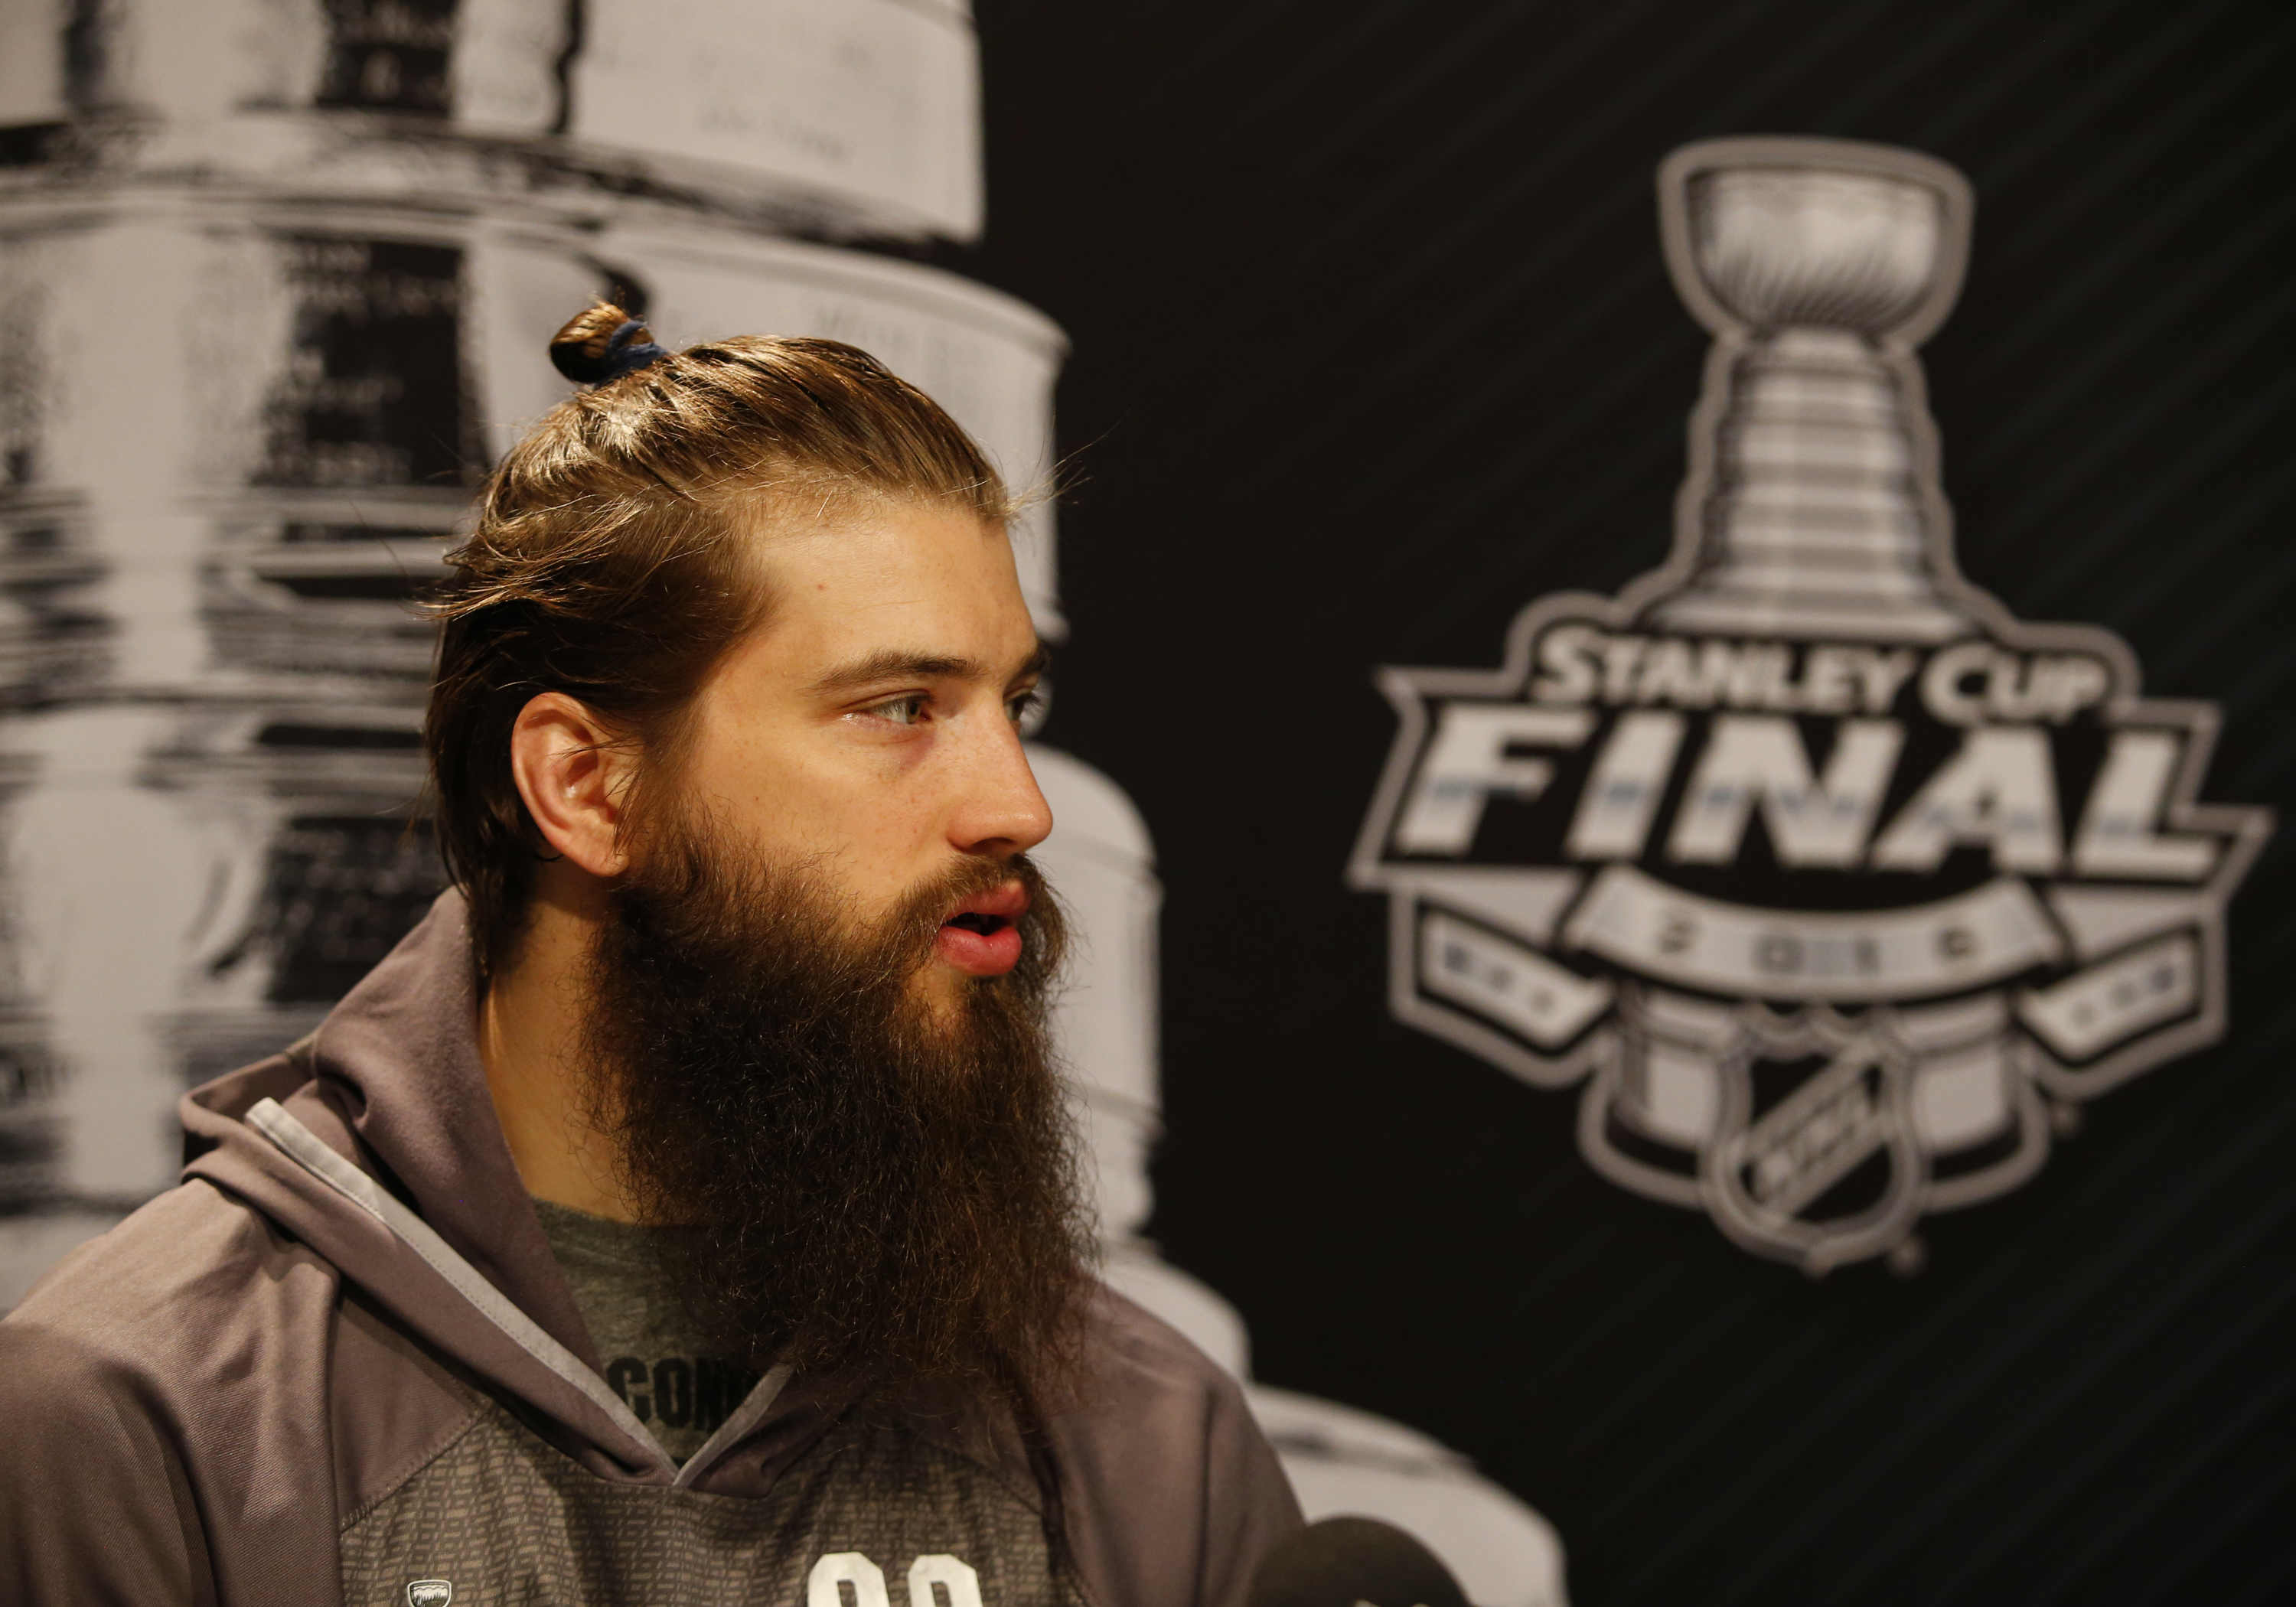 PITTSBURGH, PA - MAY 29: Brent Burns #88 of the San Jose Sharks addresses the media during the NHL Stanley Cup Final Media Day at Consol Energy Center on May 29, 2016 in Pittsburgh, Pennsylvania. (Photo by Justin K. Aller/Getty Images)